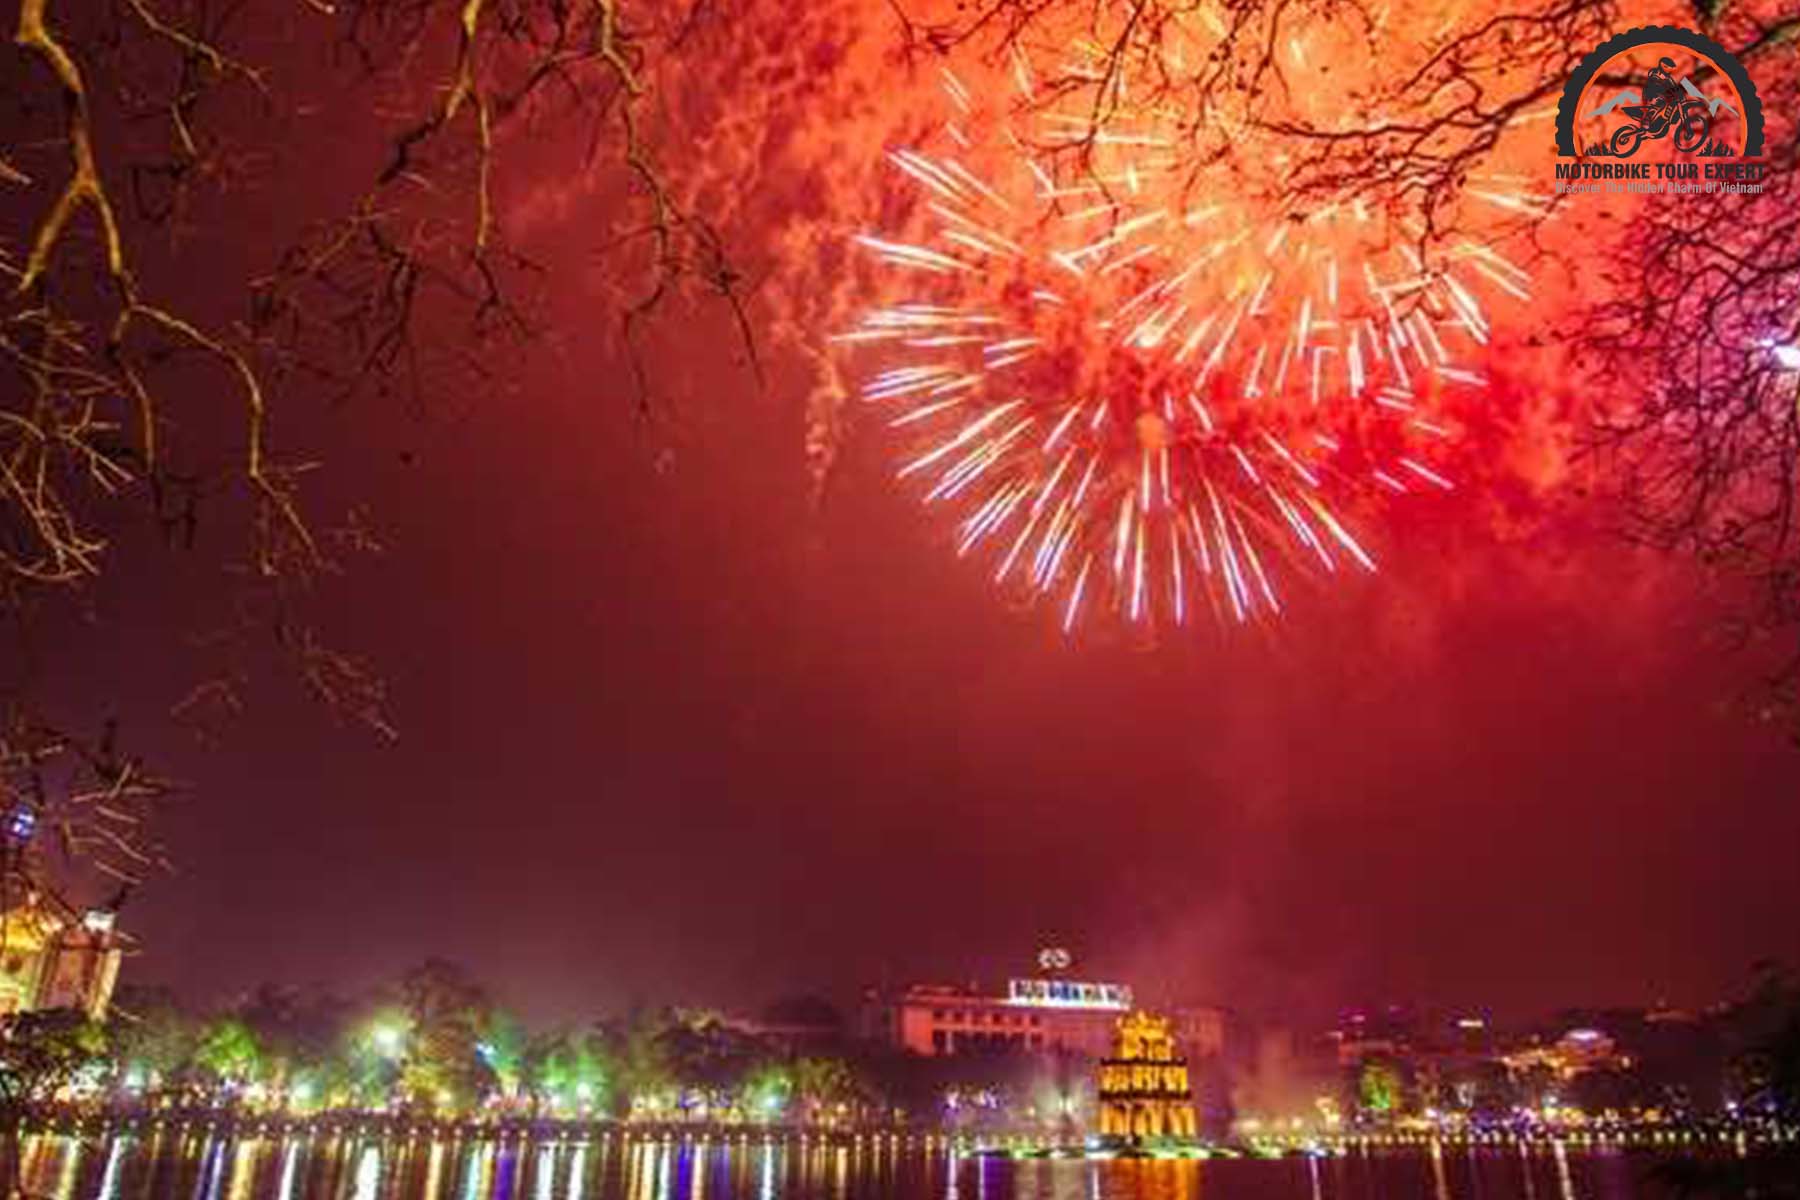 Spring in Hanoi ignites the night sky with magnificent fireworks